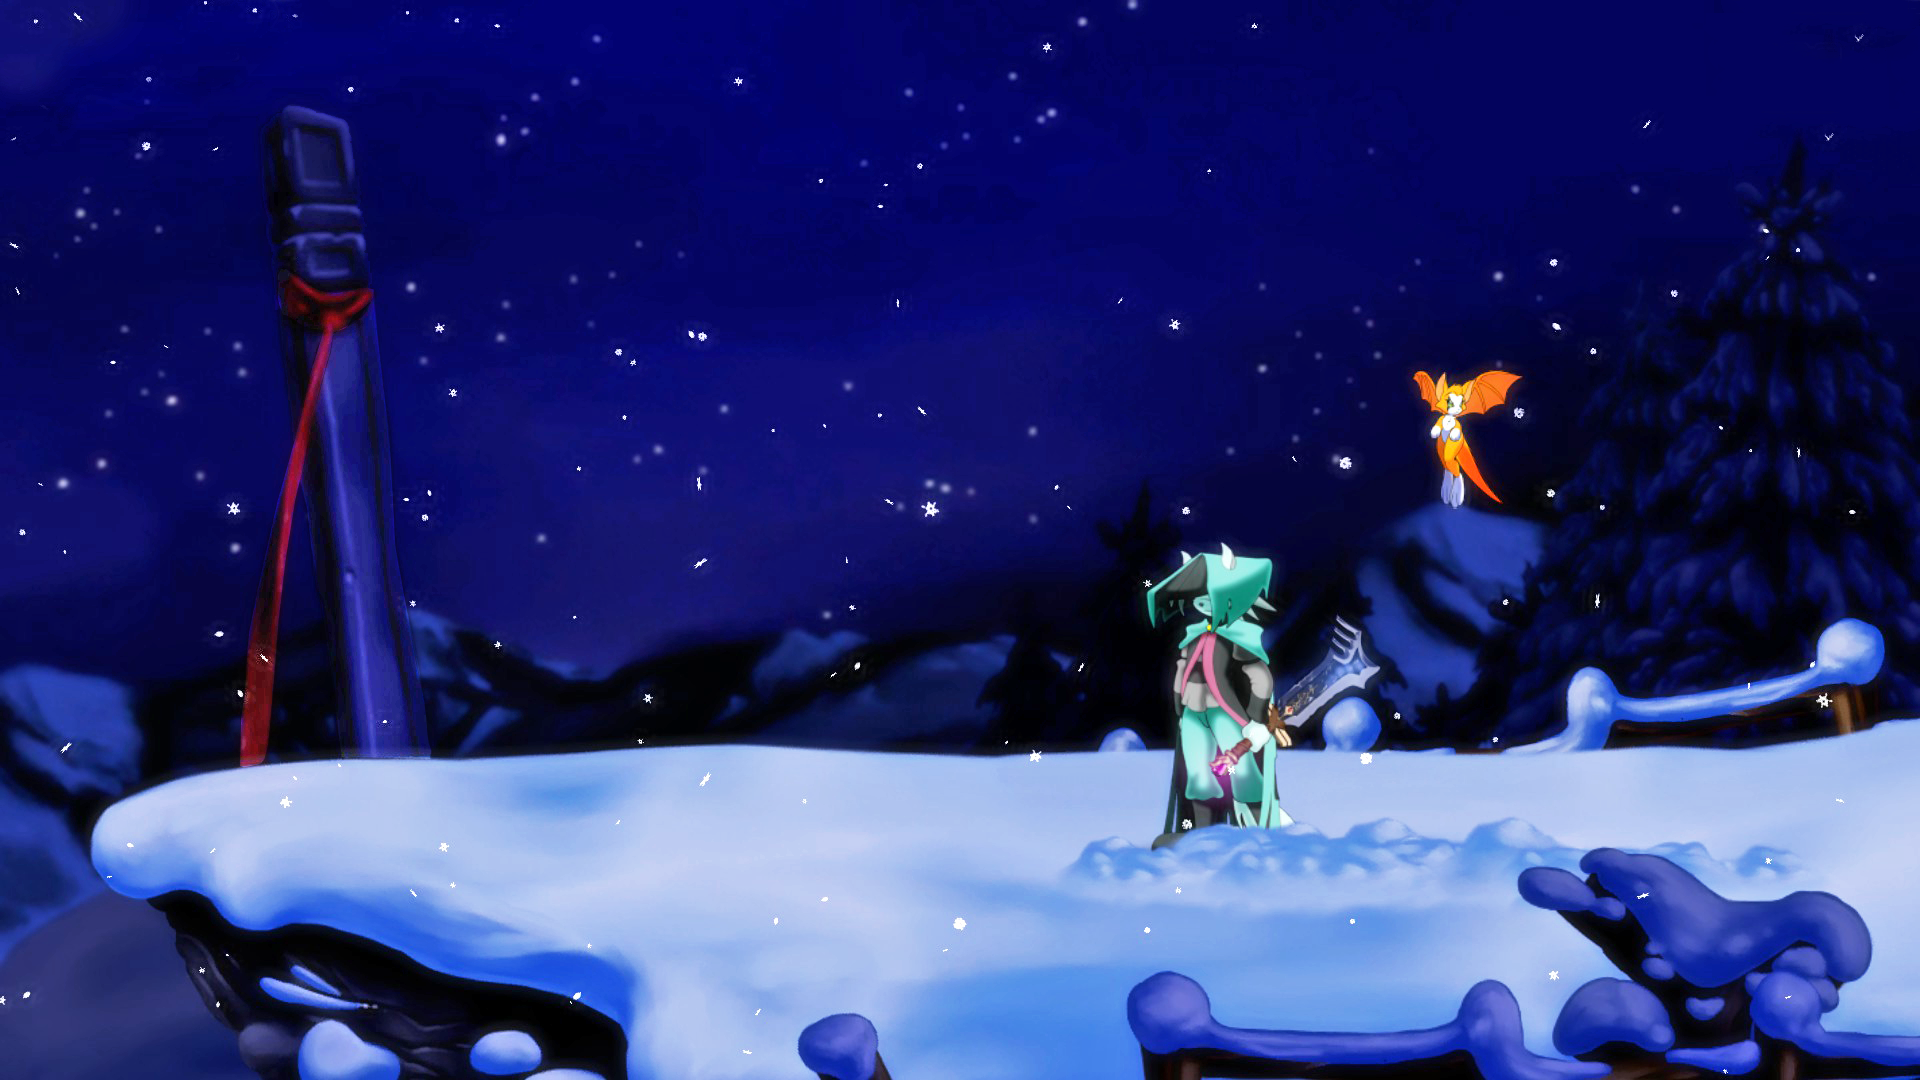 Dust: An Elysian Tail Wallpapers